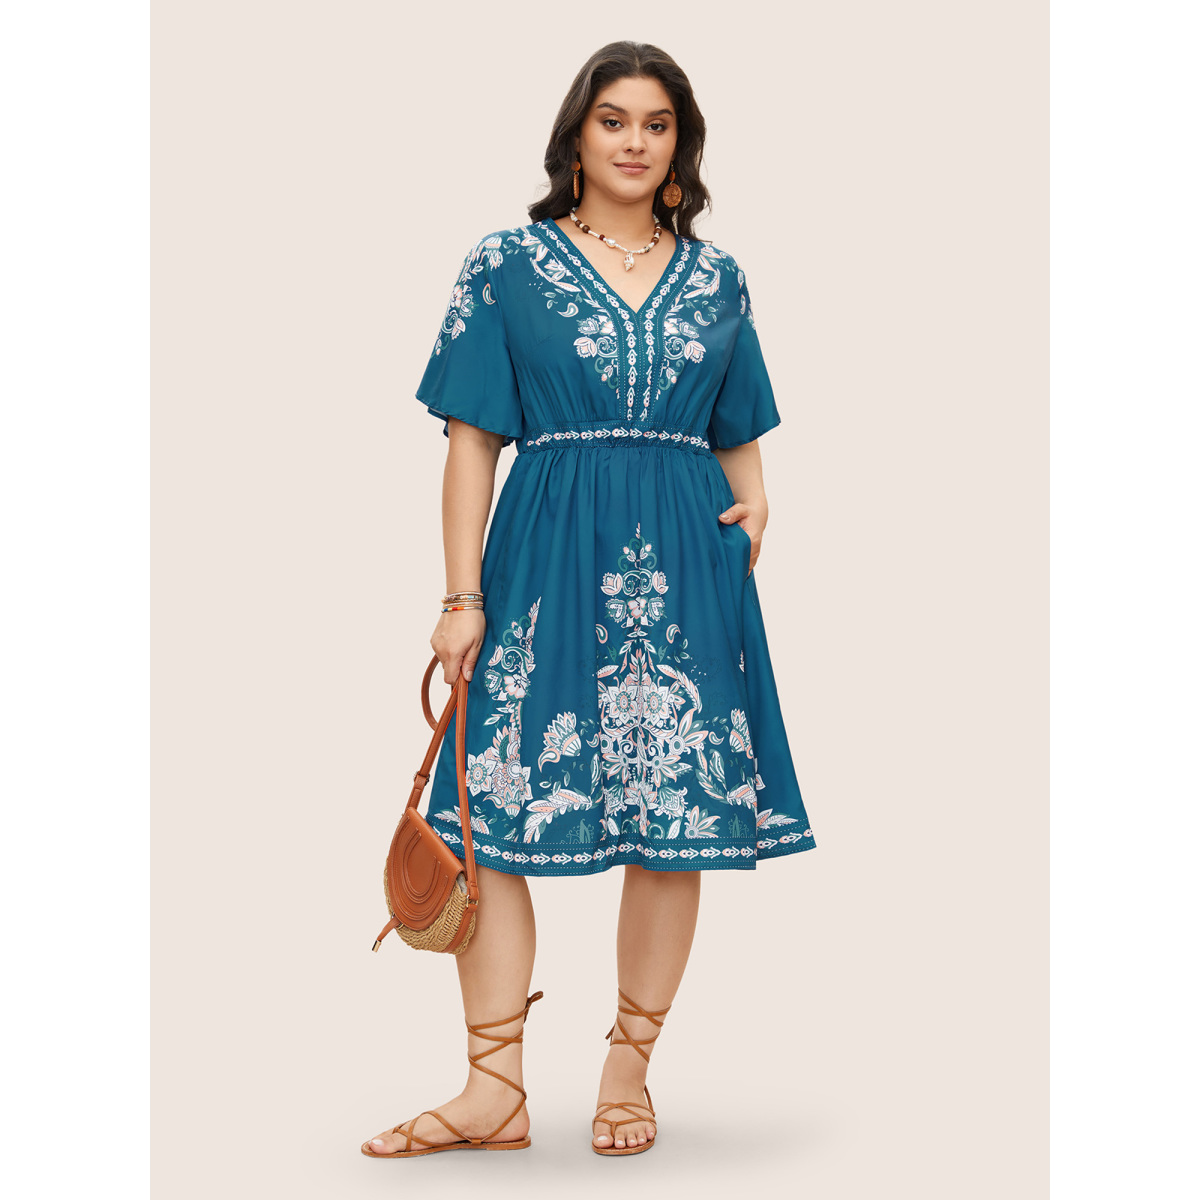 

Vintage Embroidered Floral Print Plus Size Vacation Dress Women Bohemian Emerald Pocket Ruffle Sleeve Short Sleeve V Neck Pocket Casual Knee Dress BloomChic, Aegean